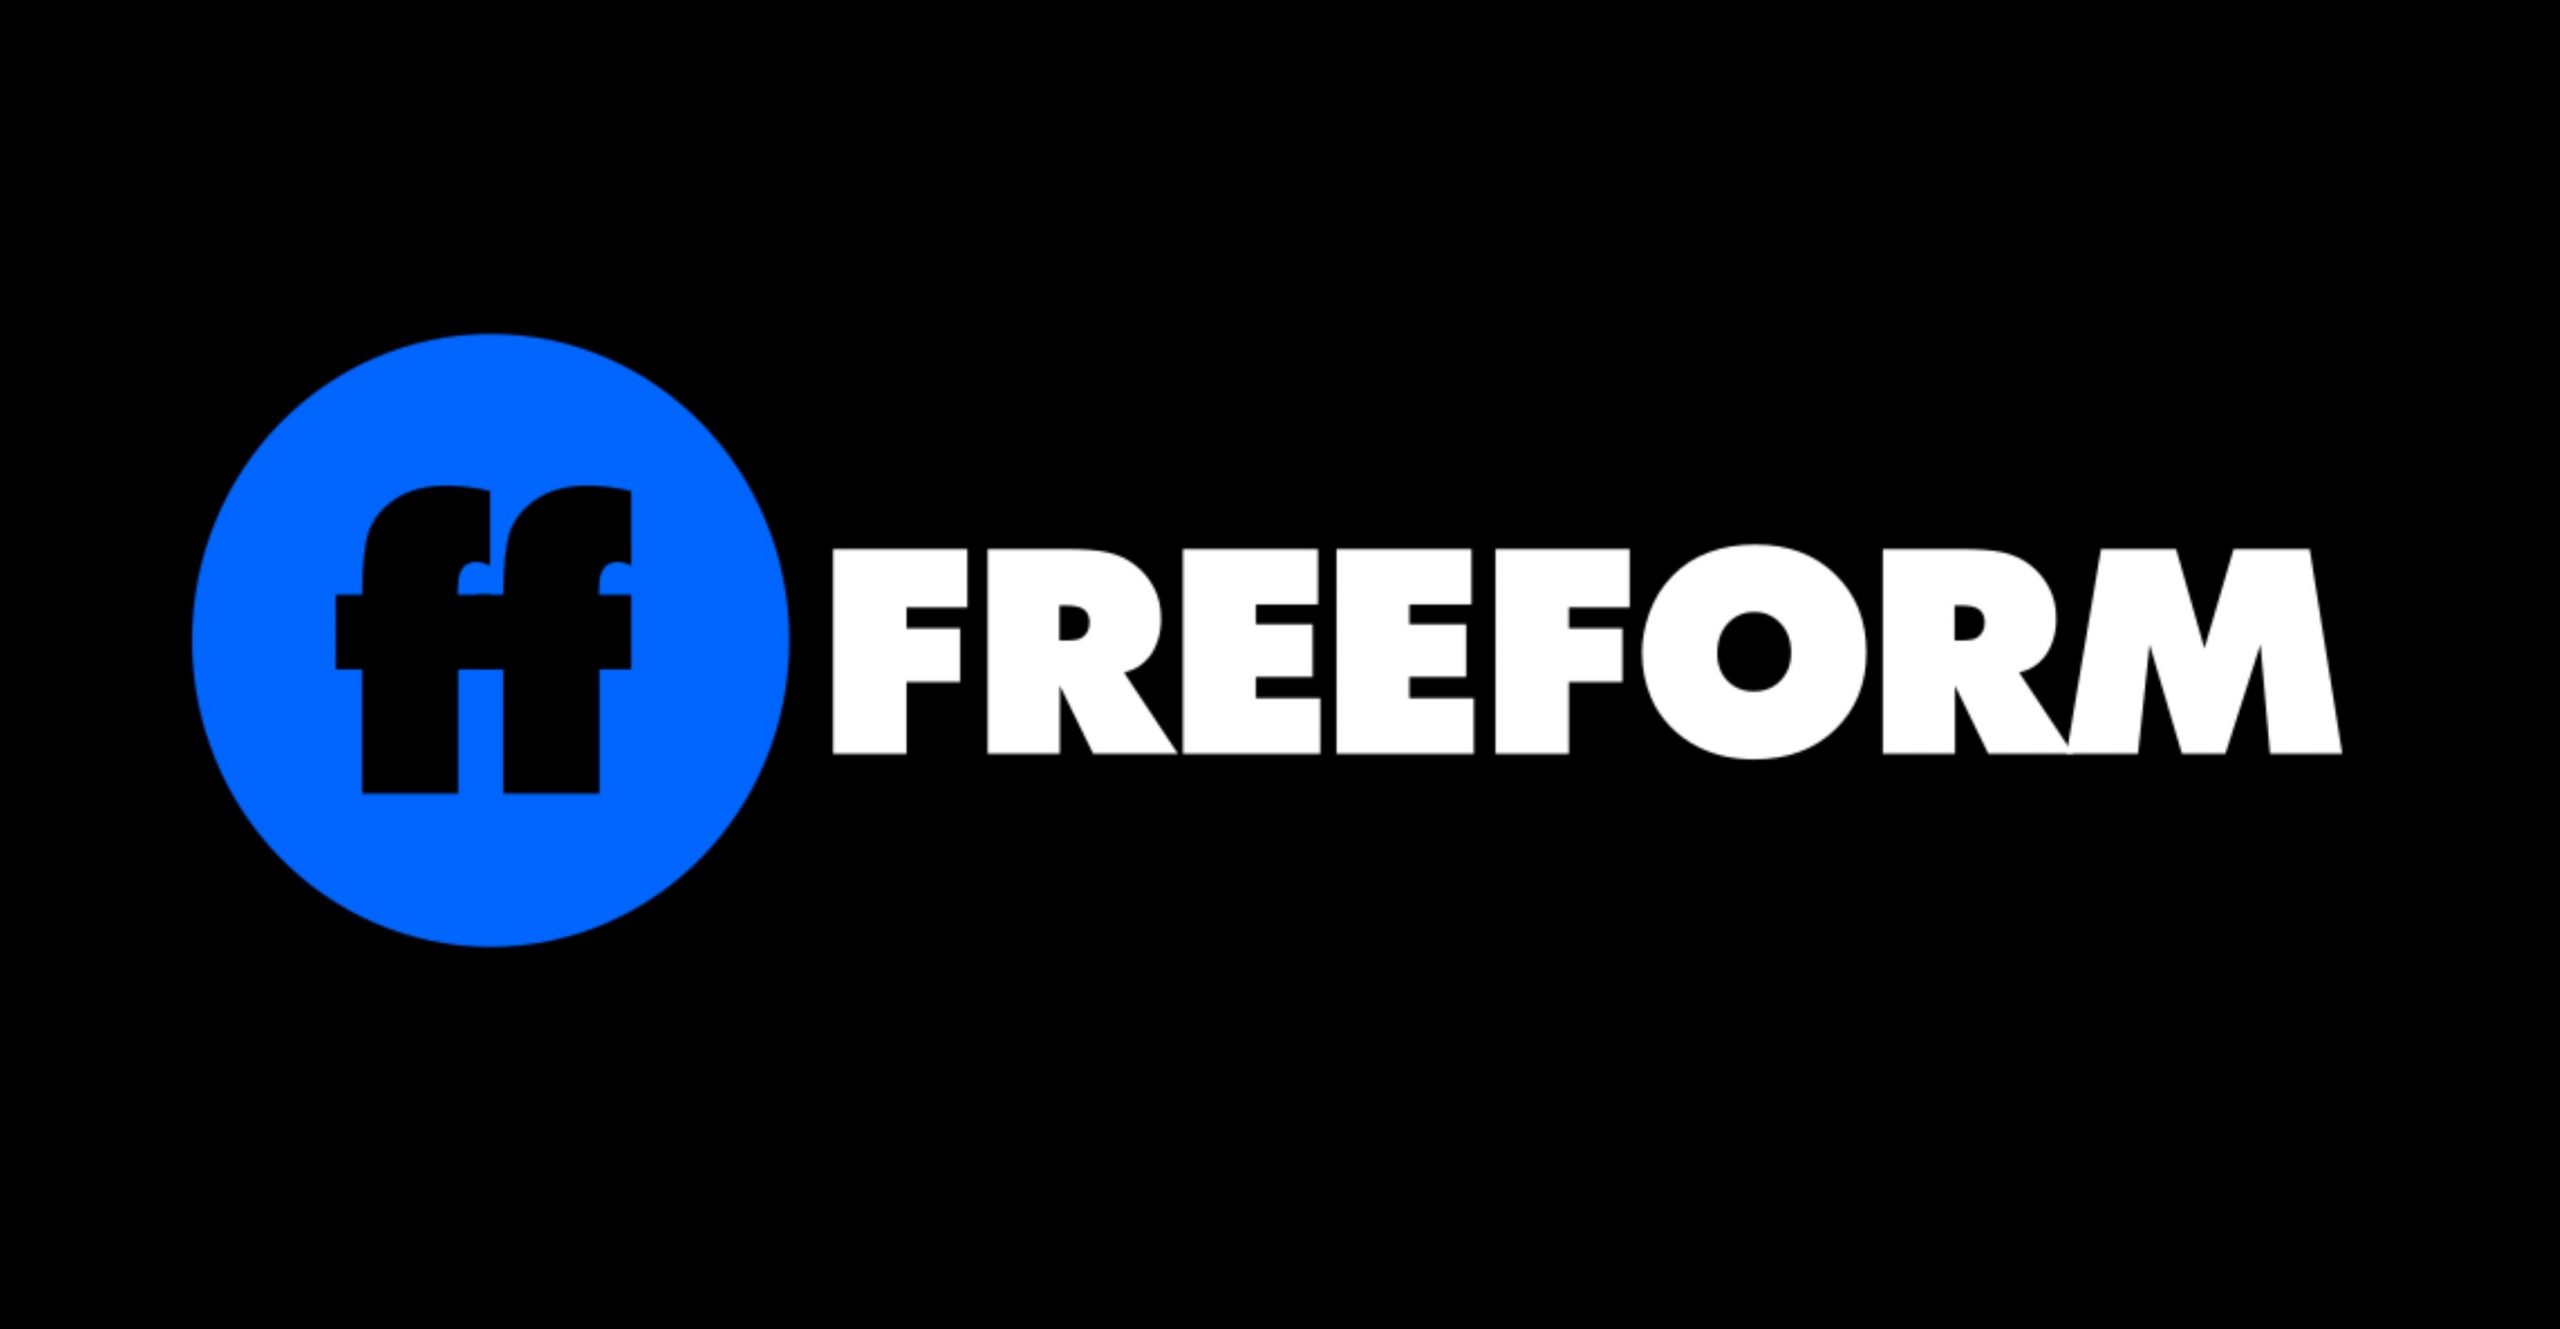 New TV Offerings Coming to Freeform in August 2020